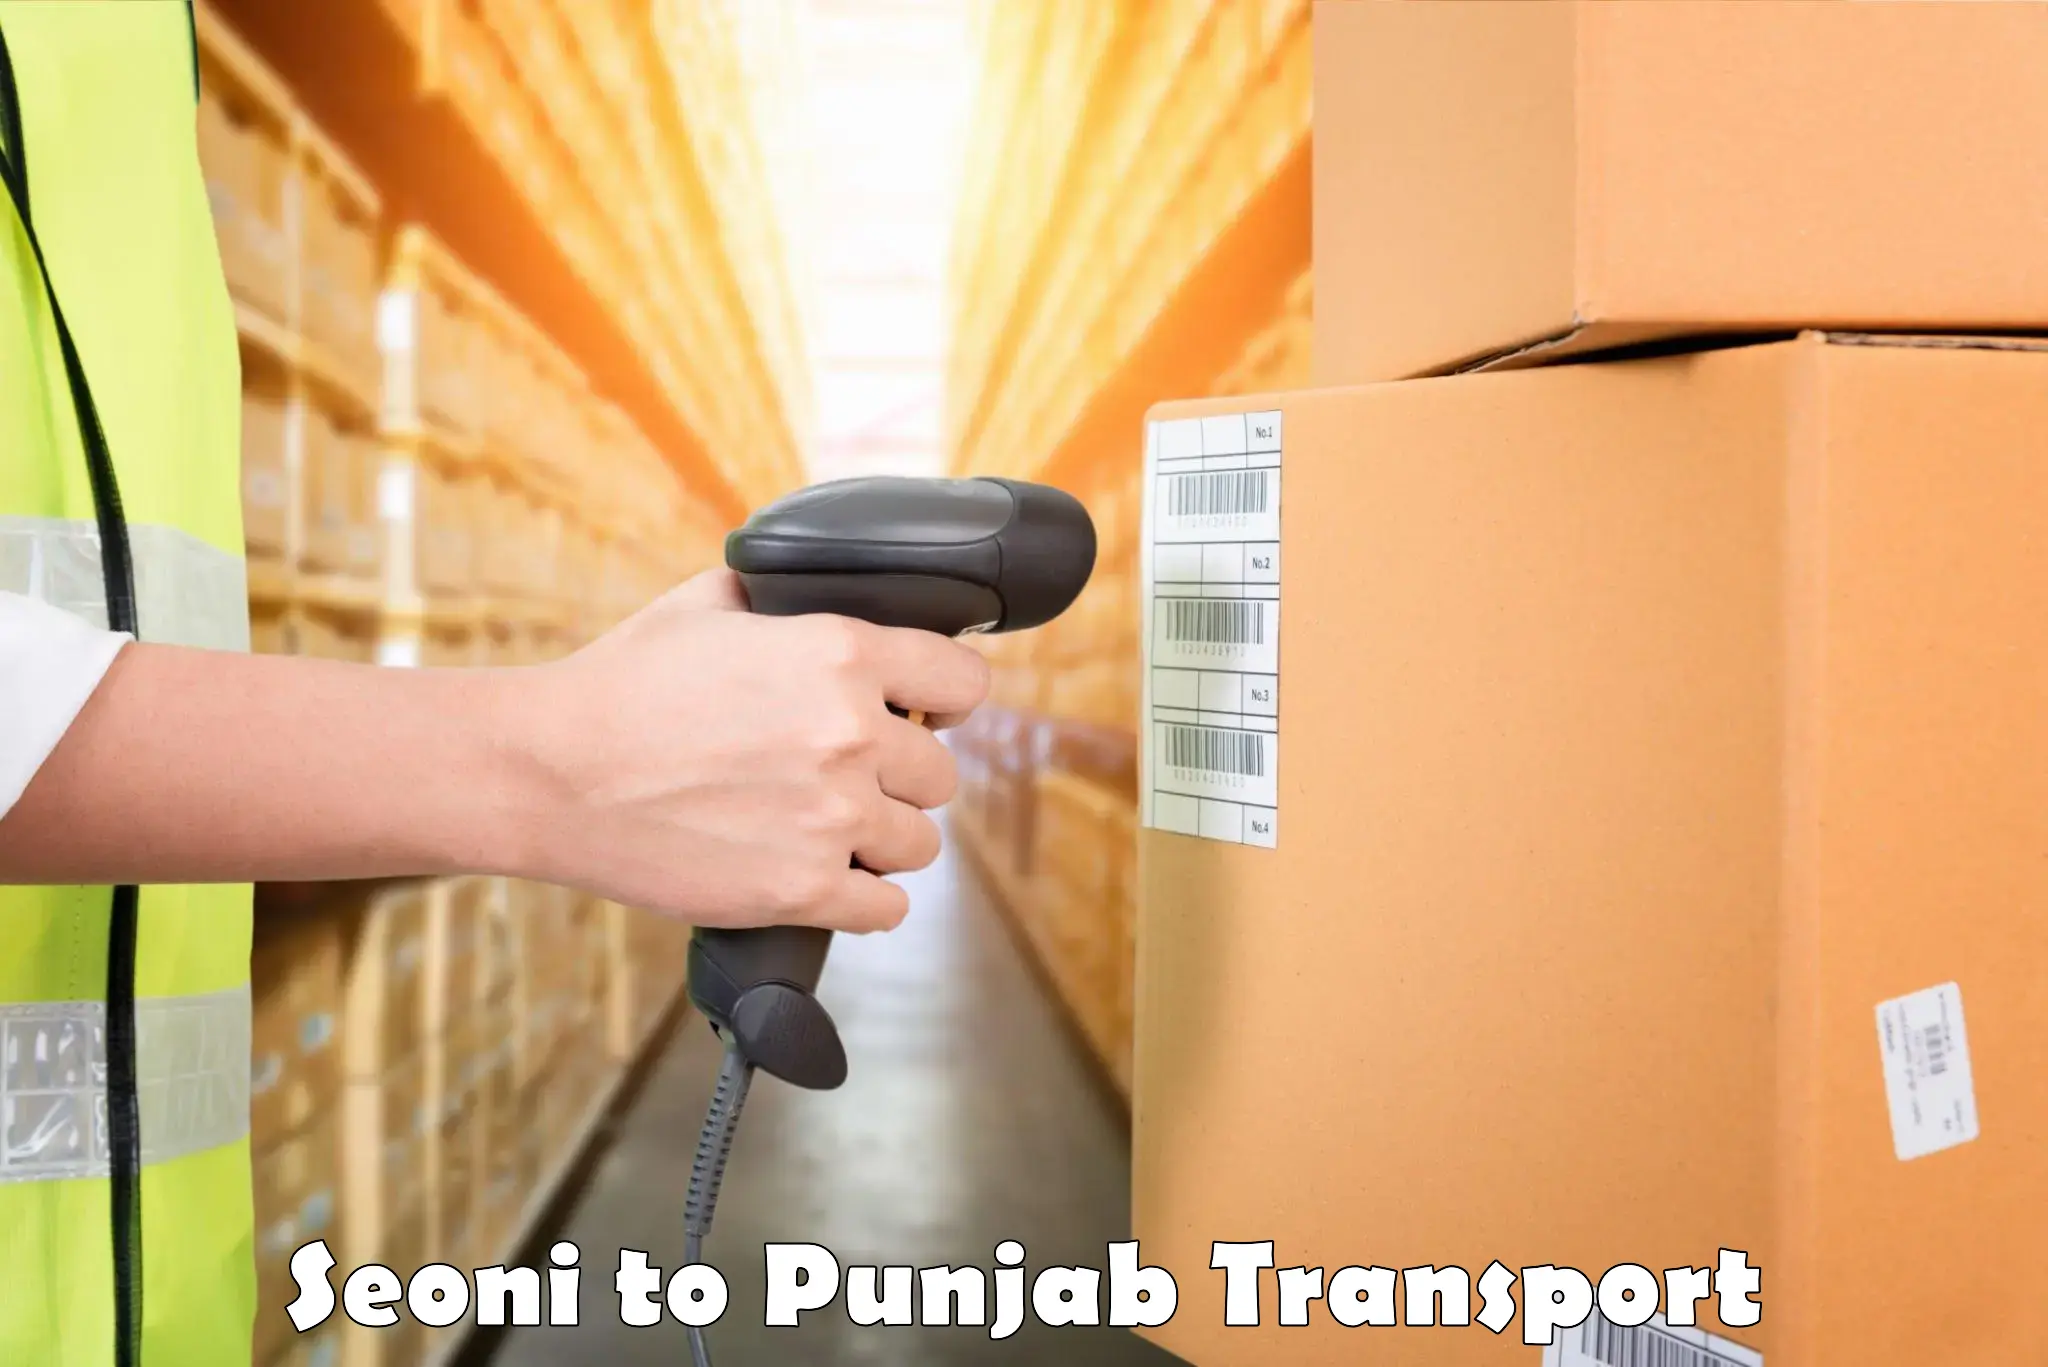 Container transport service Seoni to Punjab